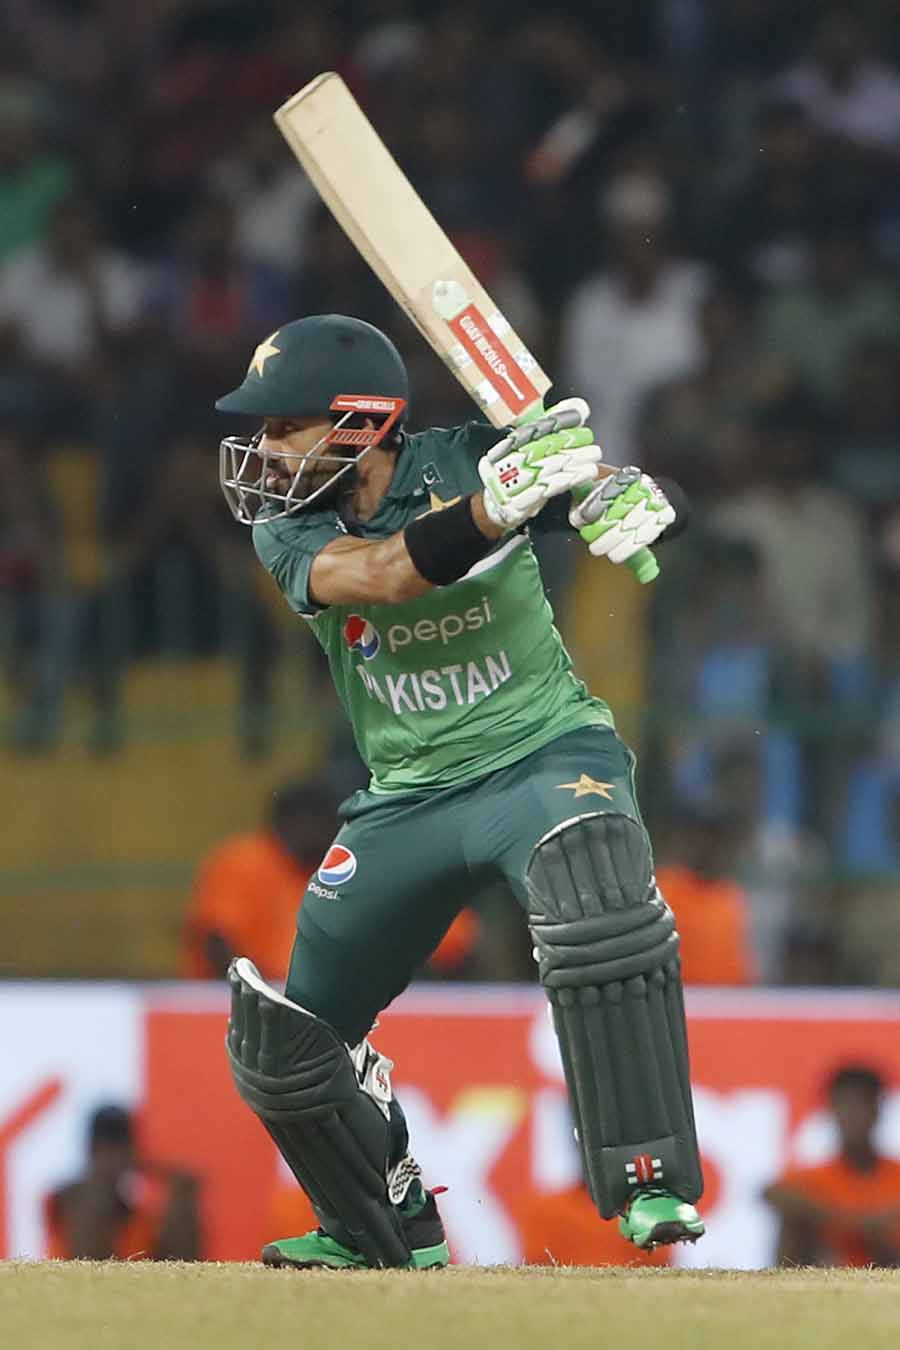 Muhammad Rizwan (Pakistan): Having begun his World Cup with a steady hand of 68 off 75 versus the Netherlands, Rizwan was under the cosh when he came into bat with Pakistan at 37 for 2 in the eighth over against Sri Lanka in Hyderabad. Babar Azam was already back in the hut, with a target of 345 looming large. But much like the great Pakistani middle-order batters of years past, Rizwan did not panic, even when he was wincing in pain. Instead, he paced his innings with an astute mixture of common sense and opportunism, finishing with an unbeaten 131 to anchor the highest World Cup chase of all-time